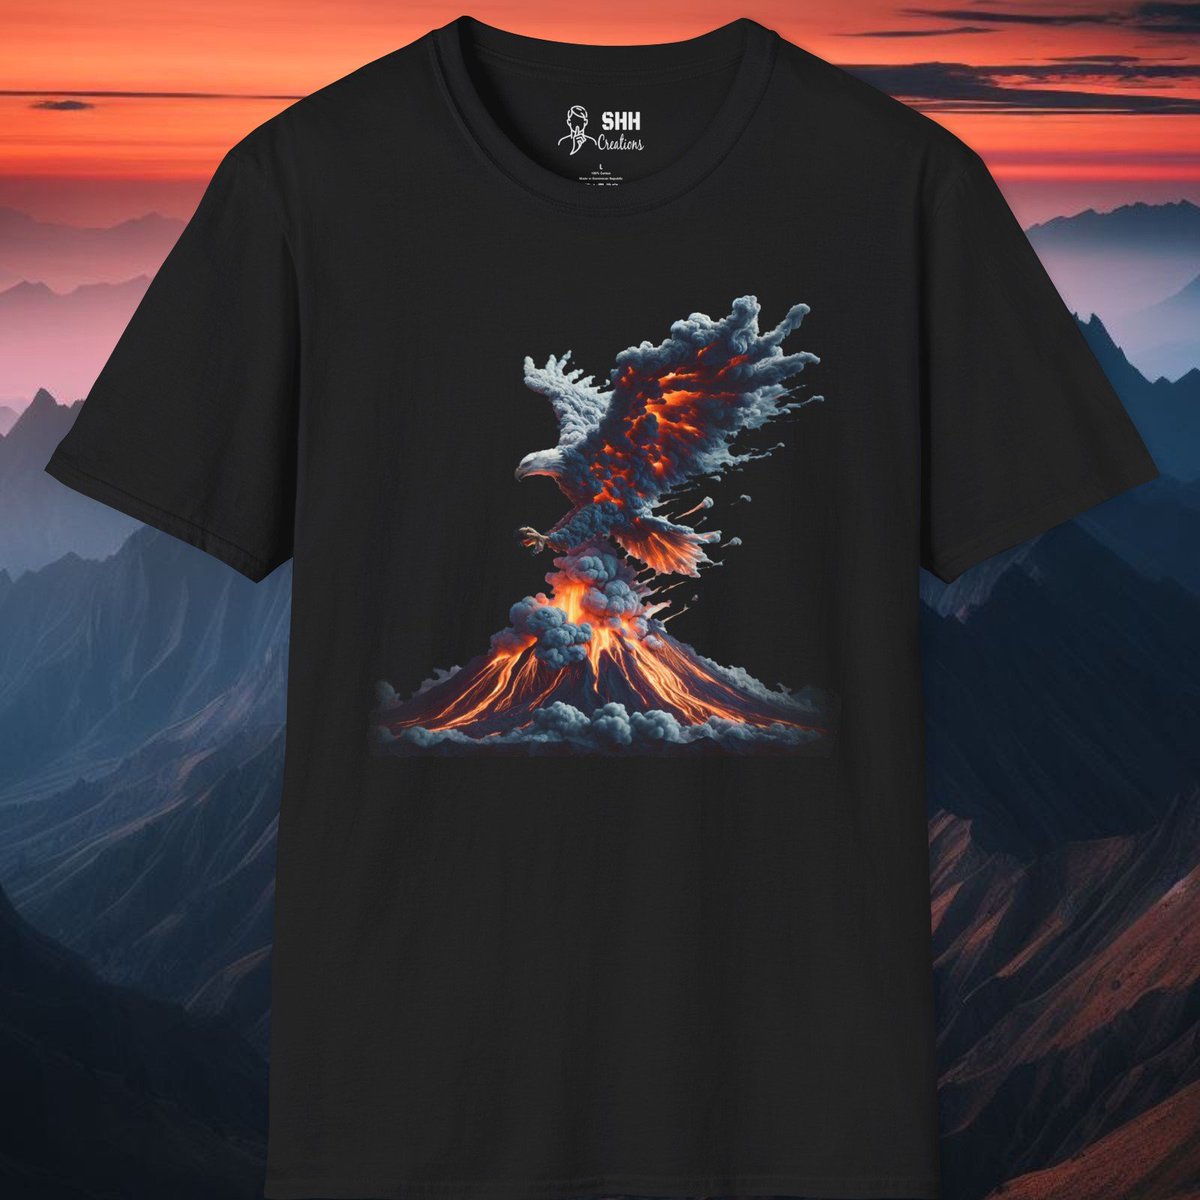 Feel the power of the Volcanic Eagle! 🌋🇺🇸 This tee is for those who carry the spirit of freedom and the force of nature. Ready to make an impact? #AmericanEagle #VolcanicForce #PatrioticWear
shhcreations.com/products/volca…